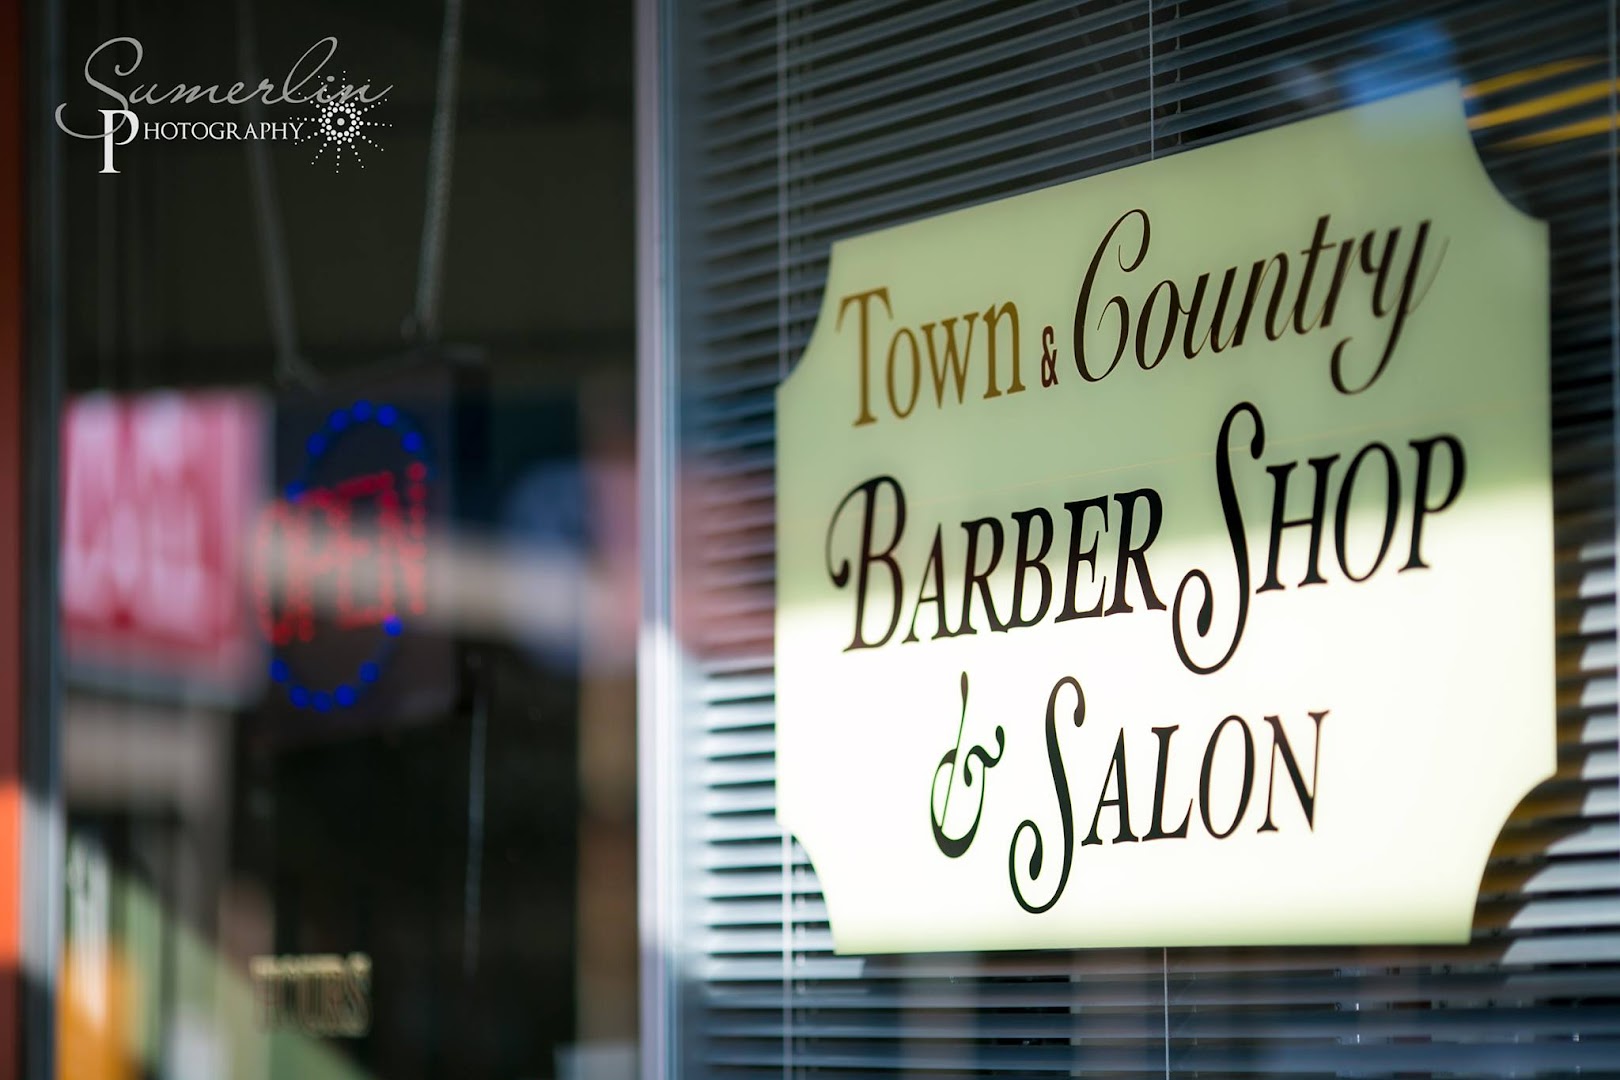 Town & Country Barber Shop & Salon